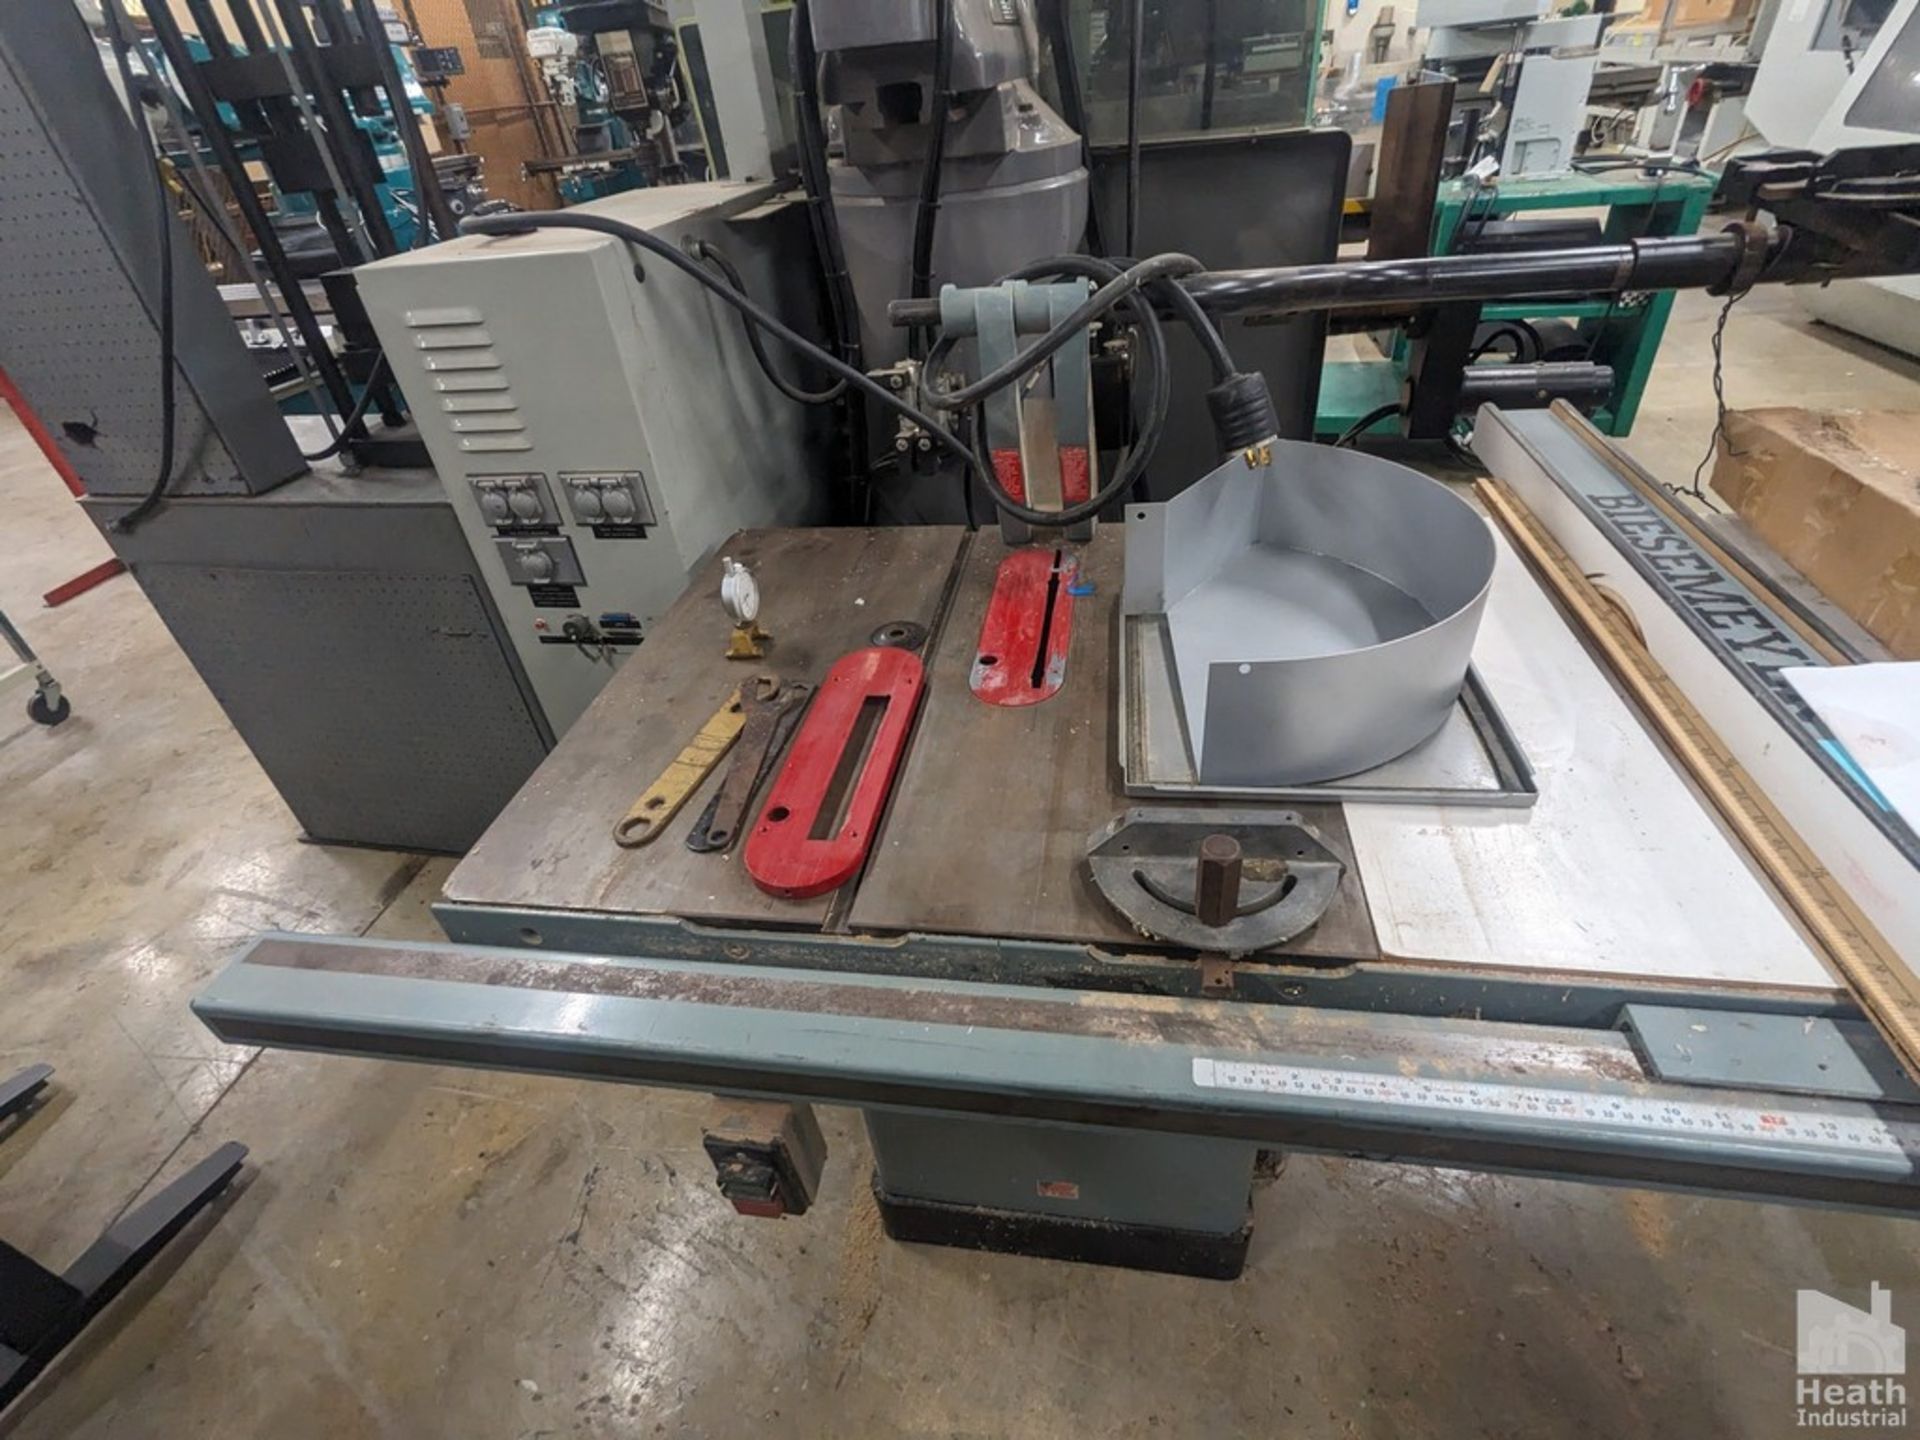 DELTA UNISAW 10" TILTING ARBOR TABLE SAW WITH EXTENDED TABLE BEISEMETER FENCE Loading Fee :$100 - Image 5 of 8